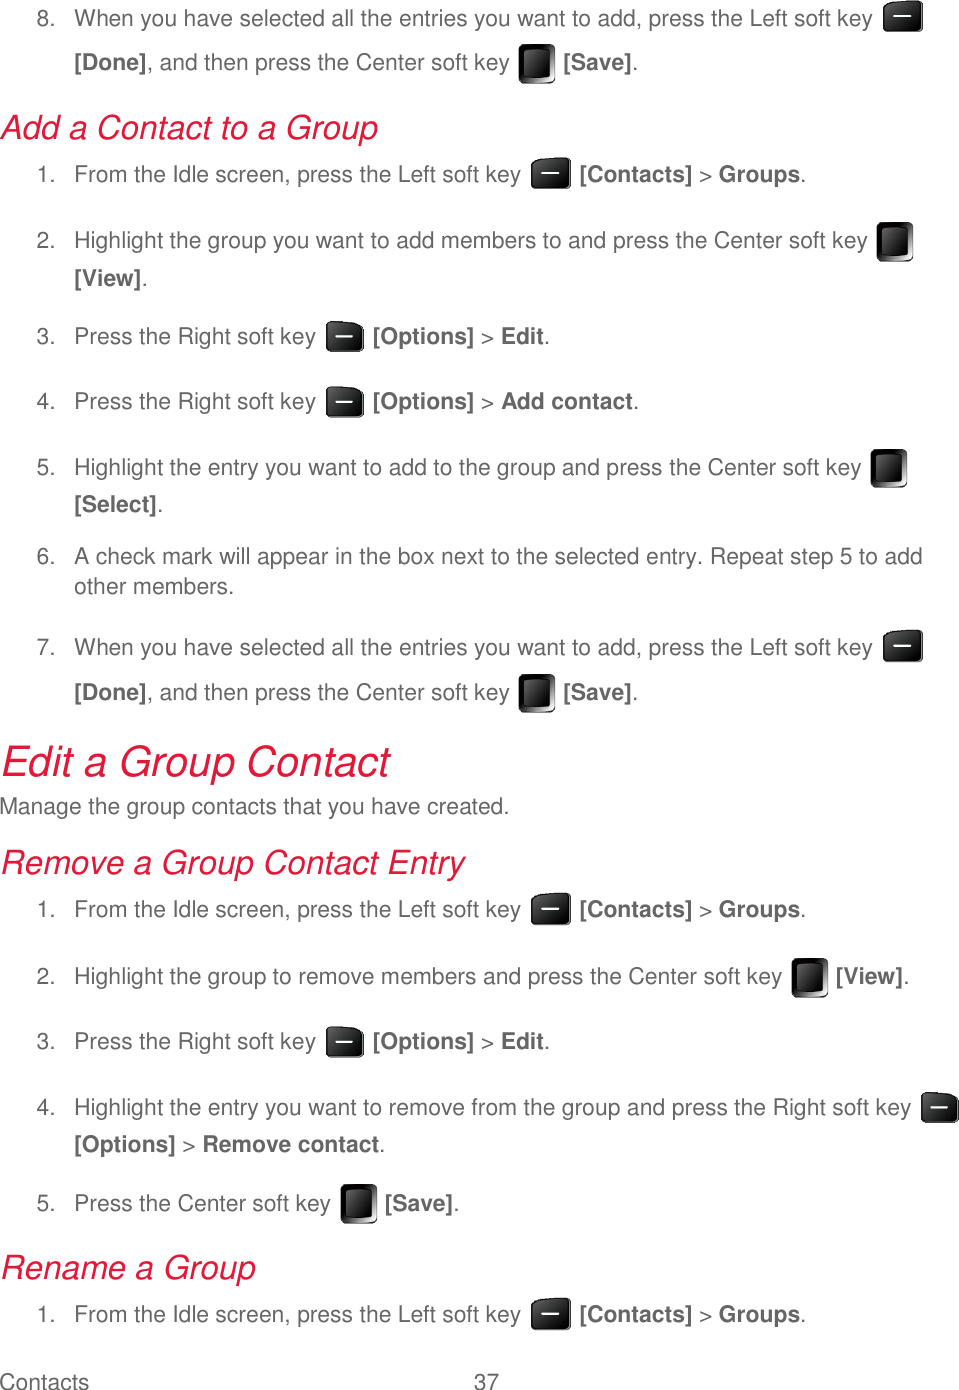 Contacts  37     When you have selected all the entries you want to add, press the Left soft key   8.[Done], and then press the Center soft key   [Save]. Add a Contact to a Group   From the Idle screen, press the Left soft key   [Contacts] &gt; Groups. 1.  Highlight the group you want to add members to and press the Center soft key   2.[View].   Press the Right soft key   [Options] &gt; Edit. 3.  Press the Right soft key   [Options] &gt; Add contact. 4.  Highlight the entry you want to add to the group and press the Center soft key   5.[Select].   A check mark will appear in the box next to the selected entry. Repeat step 5 to add 6.other members.   When you have selected all the entries you want to add, press the Left soft key   7.[Done], and then press the Center soft key   [Save]. Edit a Group Contact Manage the group contacts that you have created. Remove a Group Contact Entry   From the Idle screen, press the Left soft key   [Contacts] &gt; Groups. 1.  Highlight the group to remove members and press the Center soft key   [View]. 2.  Press the Right soft key   [Options] &gt; Edit. 3.  Highlight the entry you want to remove from the group and press the Right soft key   4.[Options] &gt; Remove contact.   Press the Center soft key   [Save]. 5.Rename a Group   From the Idle screen, press the Left soft key   [Contacts] &gt; Groups. 1.